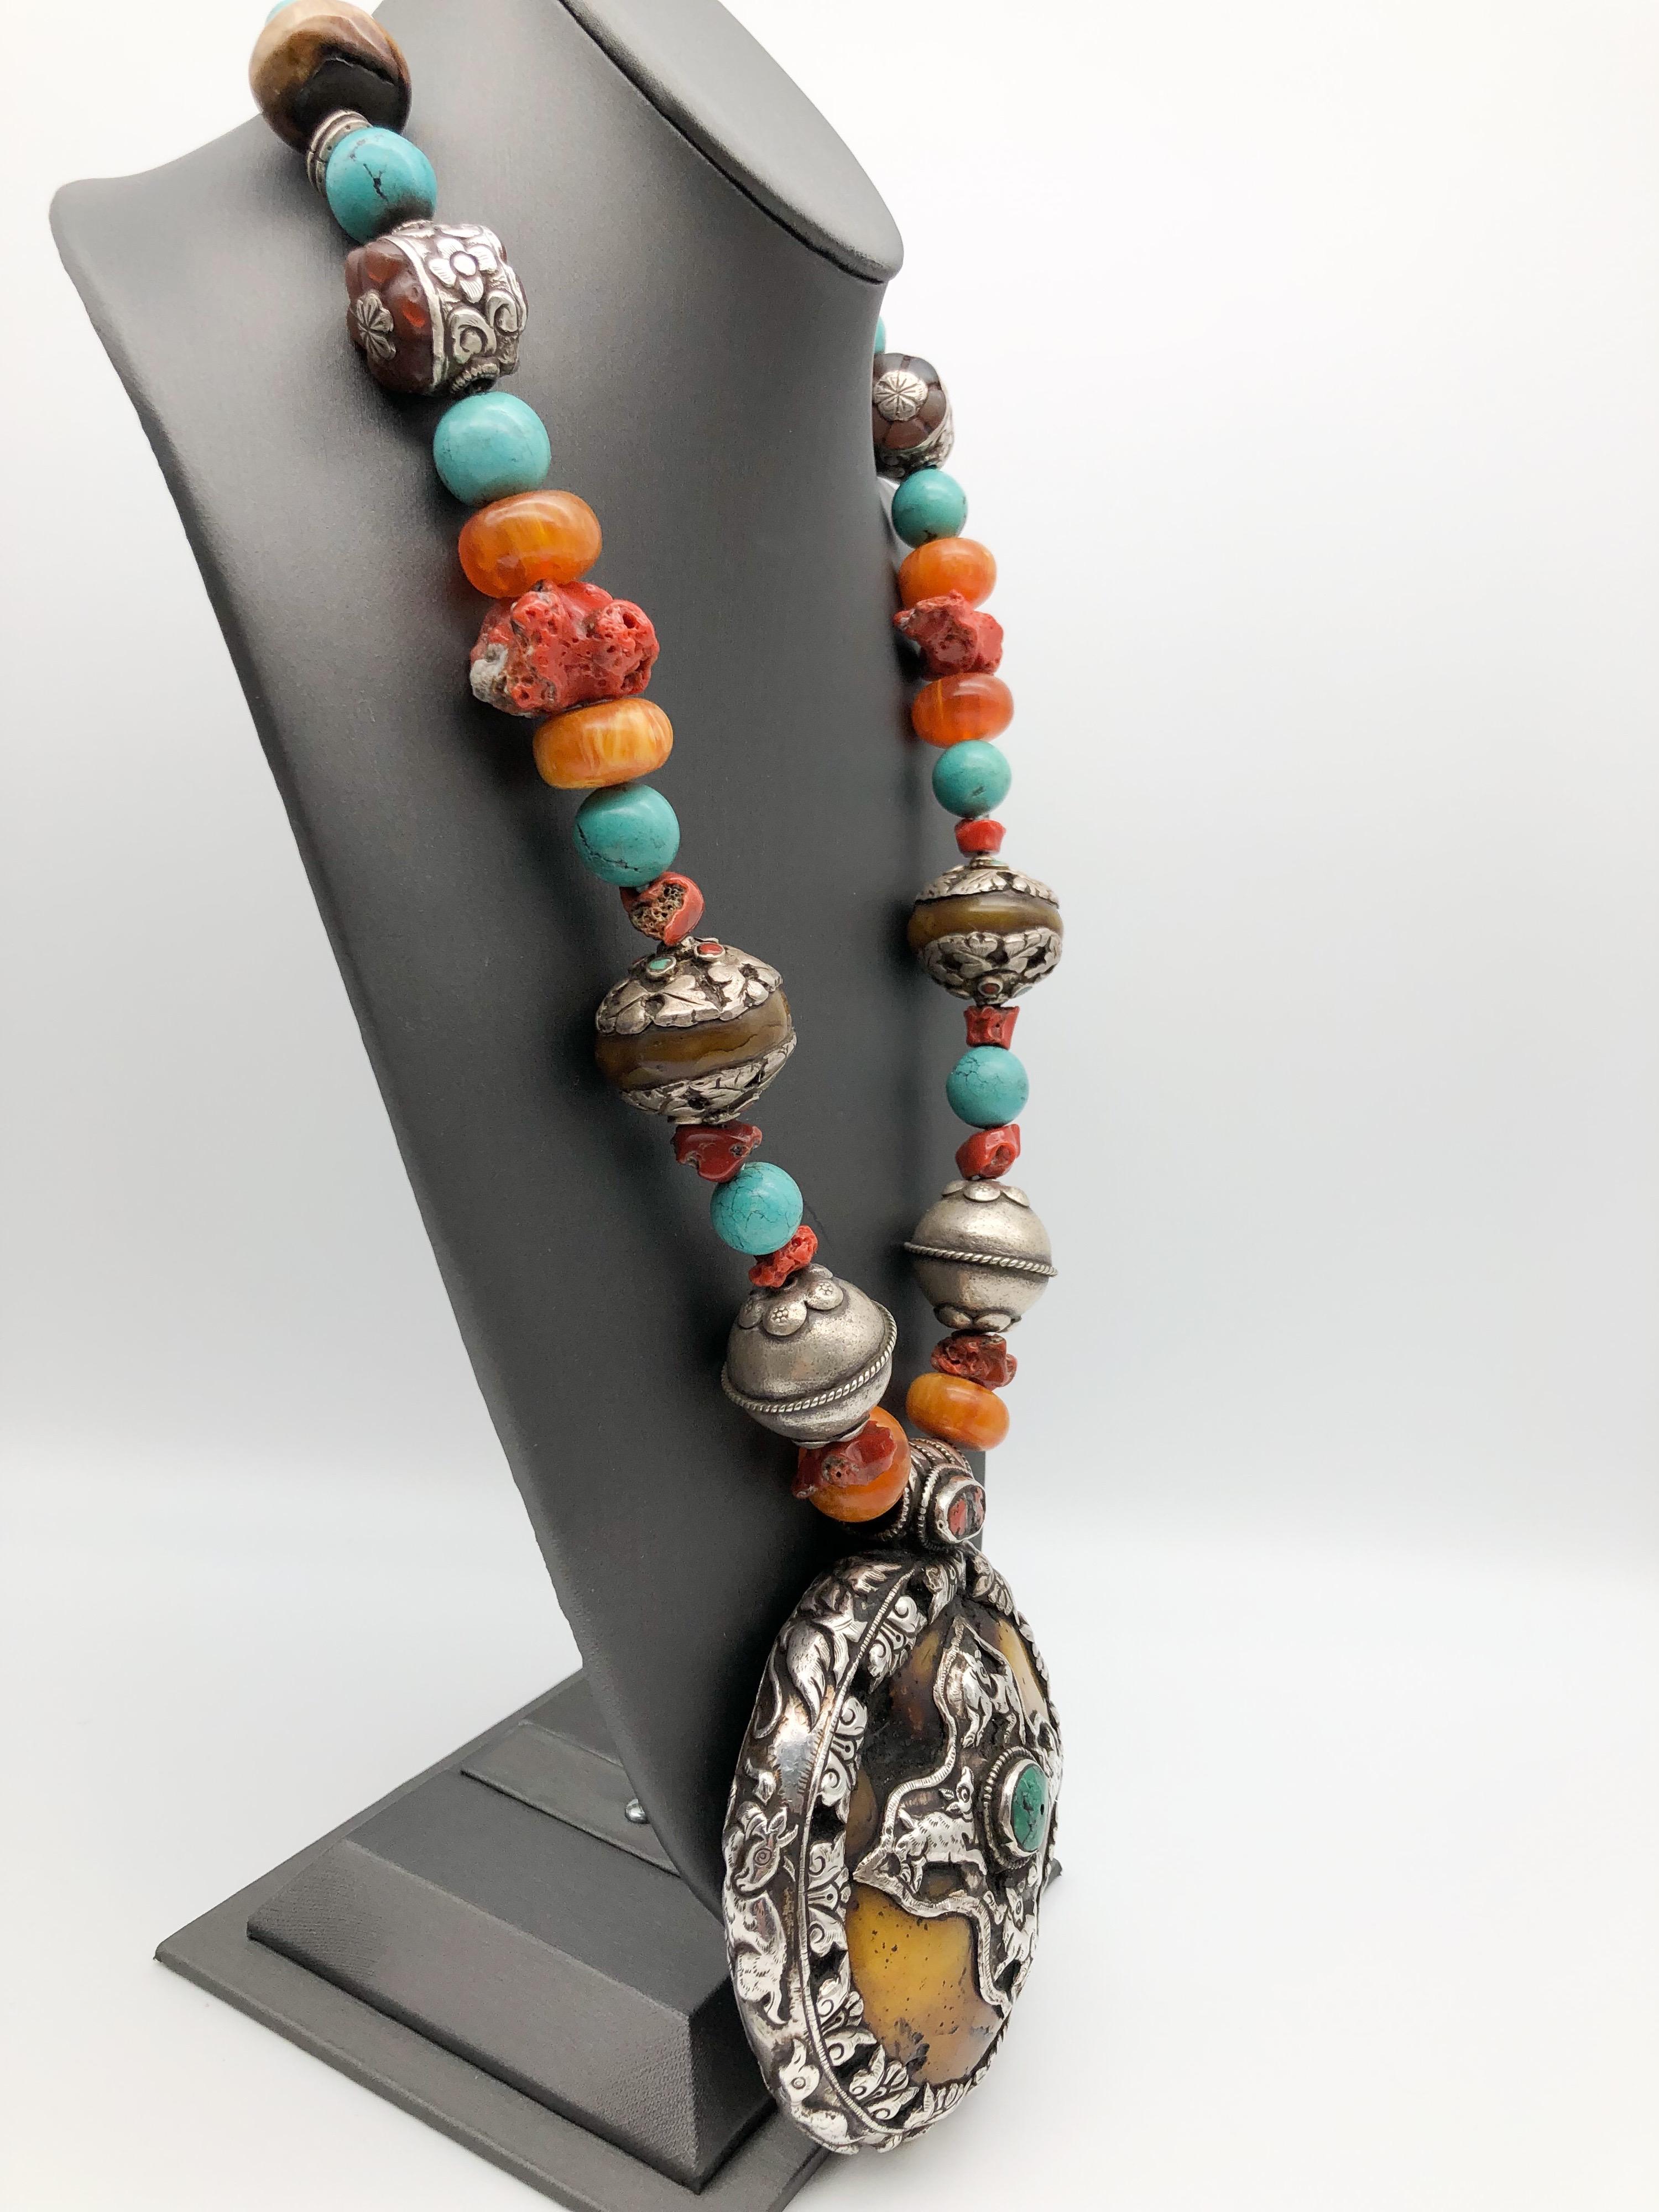 One-of-a-Kind

This is an exquisitely crafted Dramatic and Bold Amber set in Sterling Silver Tibetan Pendant. Sterling Silver cross design center and Turquoise decoration. Tibetan artists always include animals and flowers in their designs. Sterling